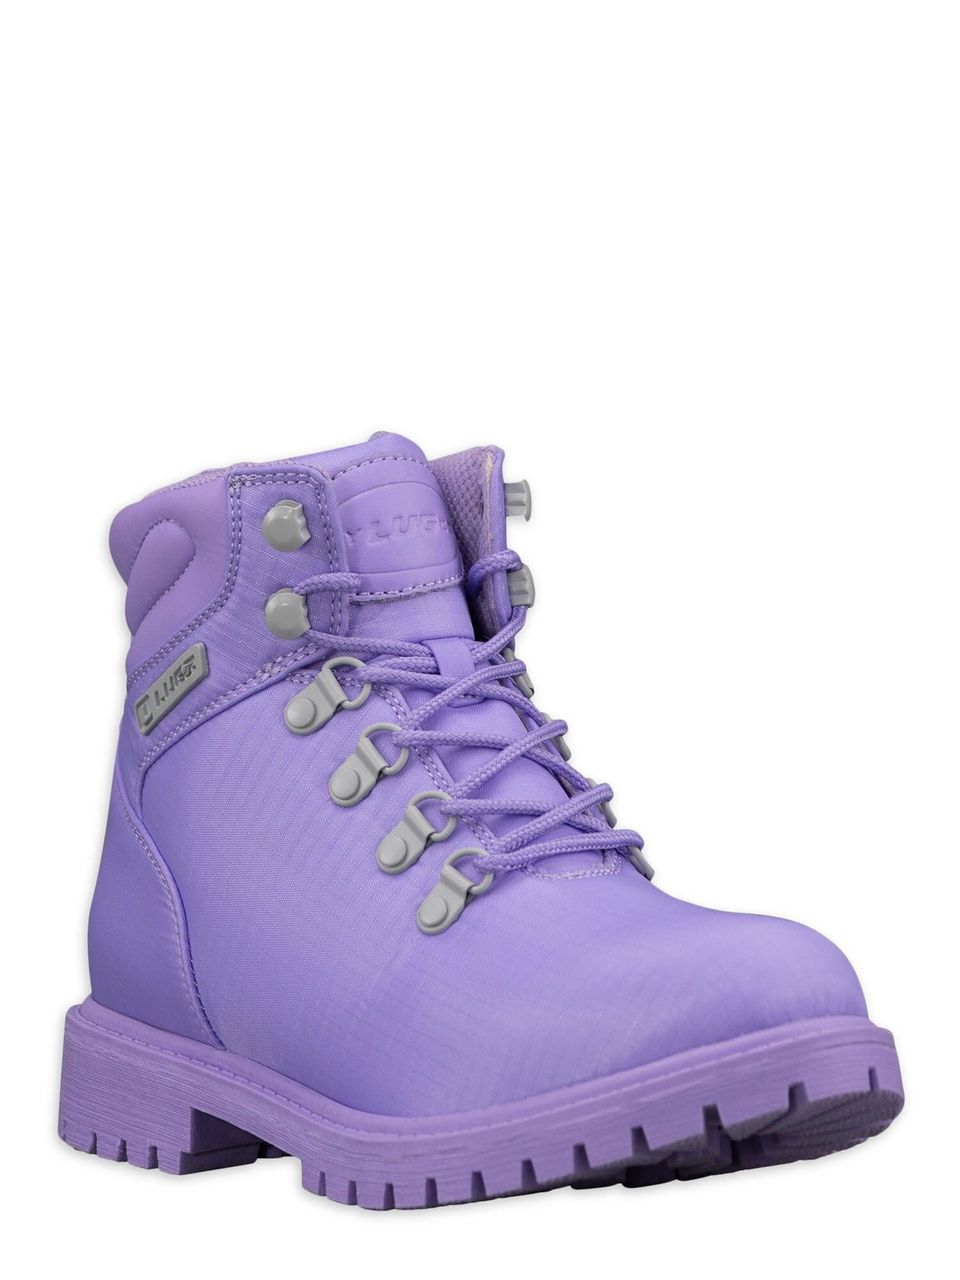 Stylish and Functional Winter Boots From Walmart | HuffPost Life